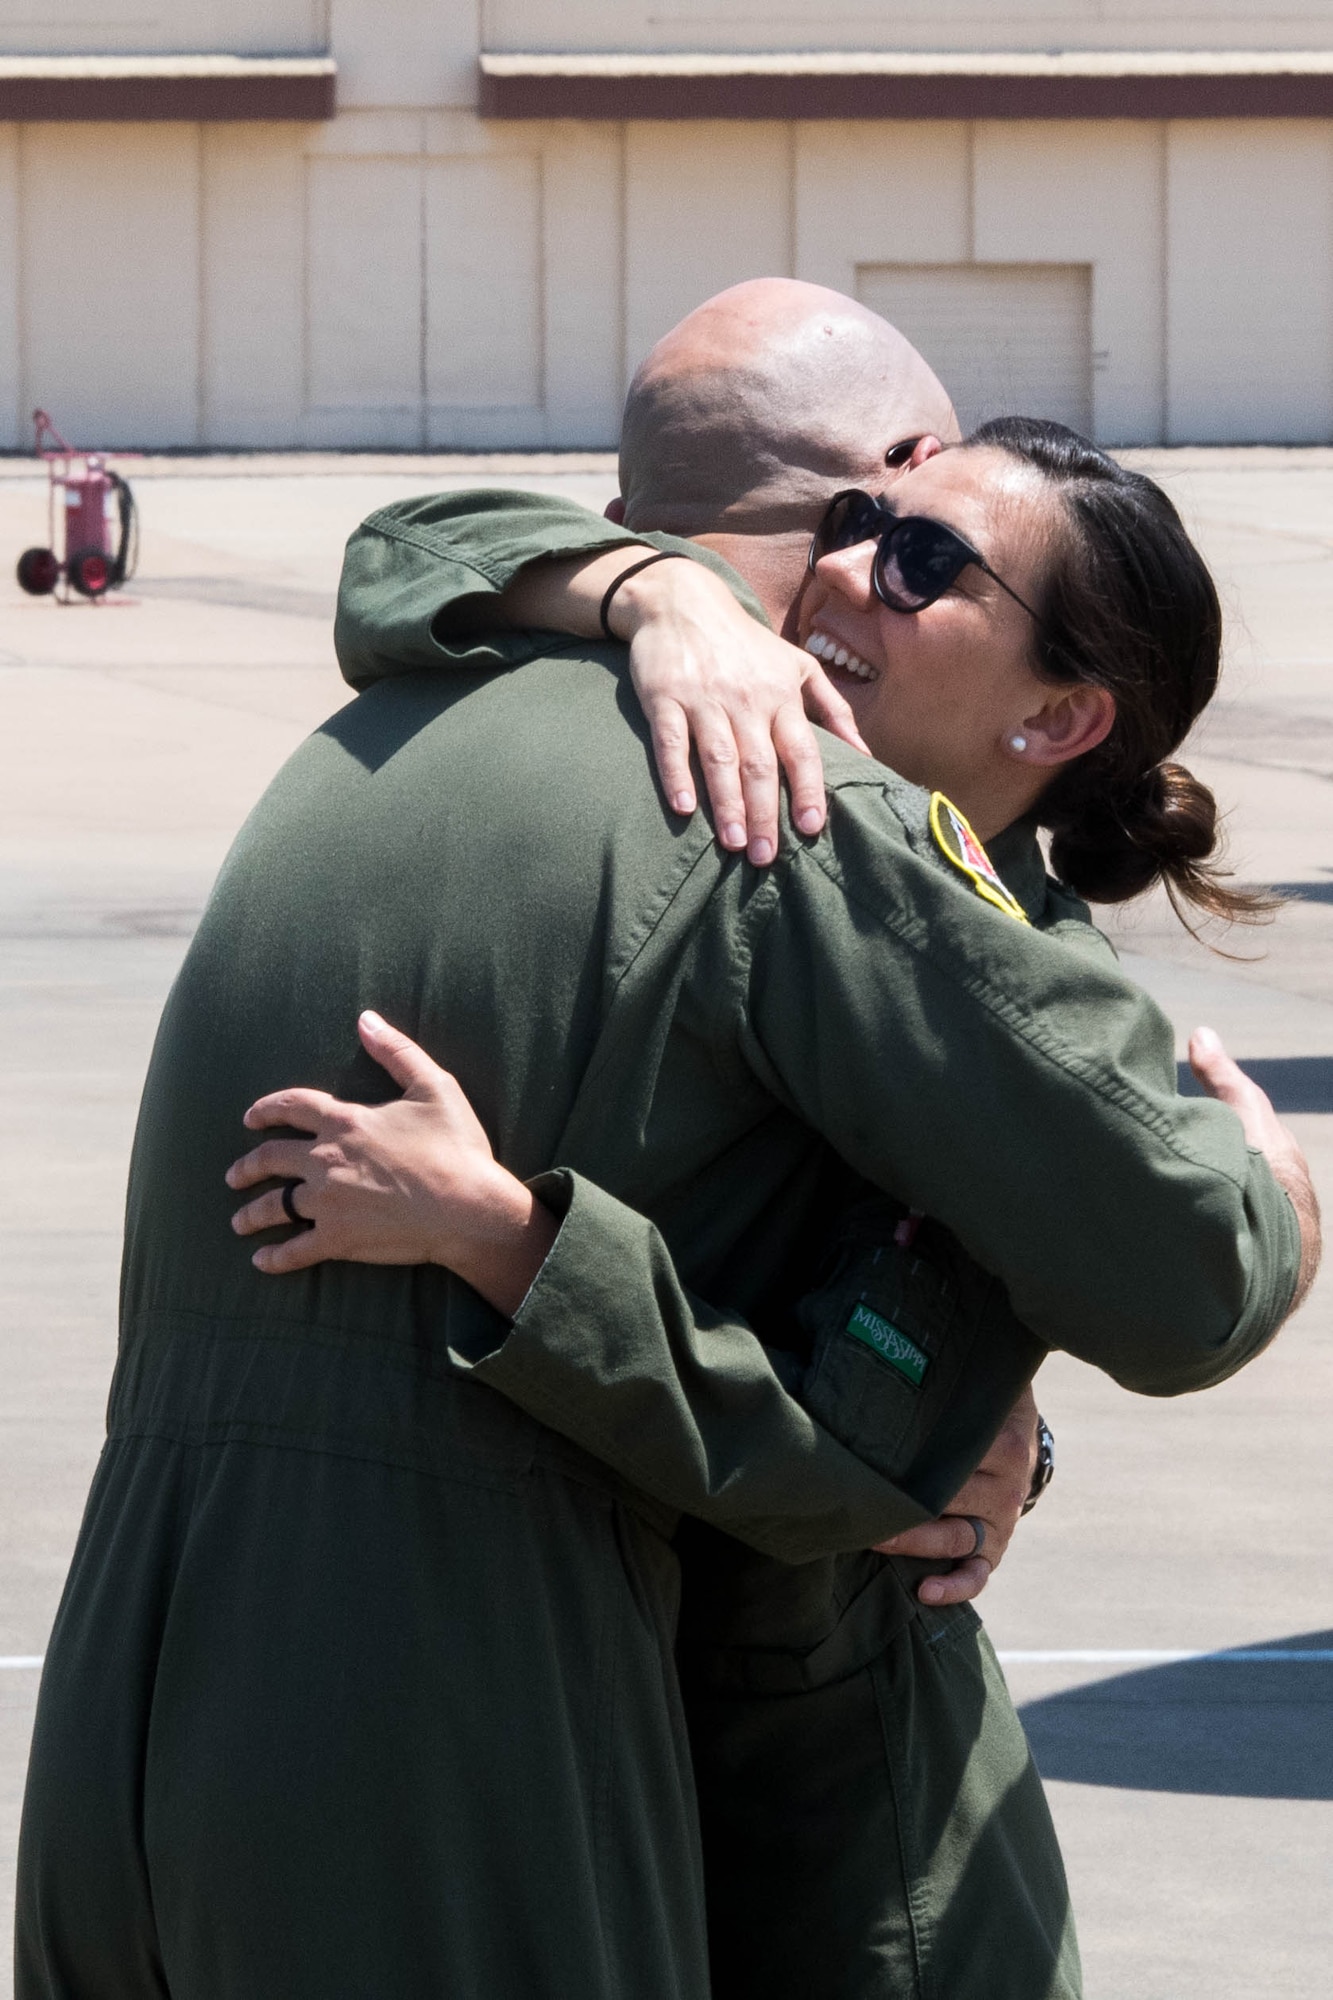 Maj. John R. Blankenship, a B-52 Stratofortress pilot with the 96th Bomb Squadron, hugs his wife Maj. Natasha E. Blankenship, a C-17 Globemaster III pilot with the 183rd Airlift Squadron in Jackson, Mississippi, after she landed her aircraft to be put on display as apart of the Barksdale Defenders of Liberty Air Show at Barksdale Air Force Base, La., May 16, 2019. The Blankenships have duty stations over 200 miles apart and rarely see each other in action. (U.S. Air Force photo by Airman Jacob B. Wrightsman)